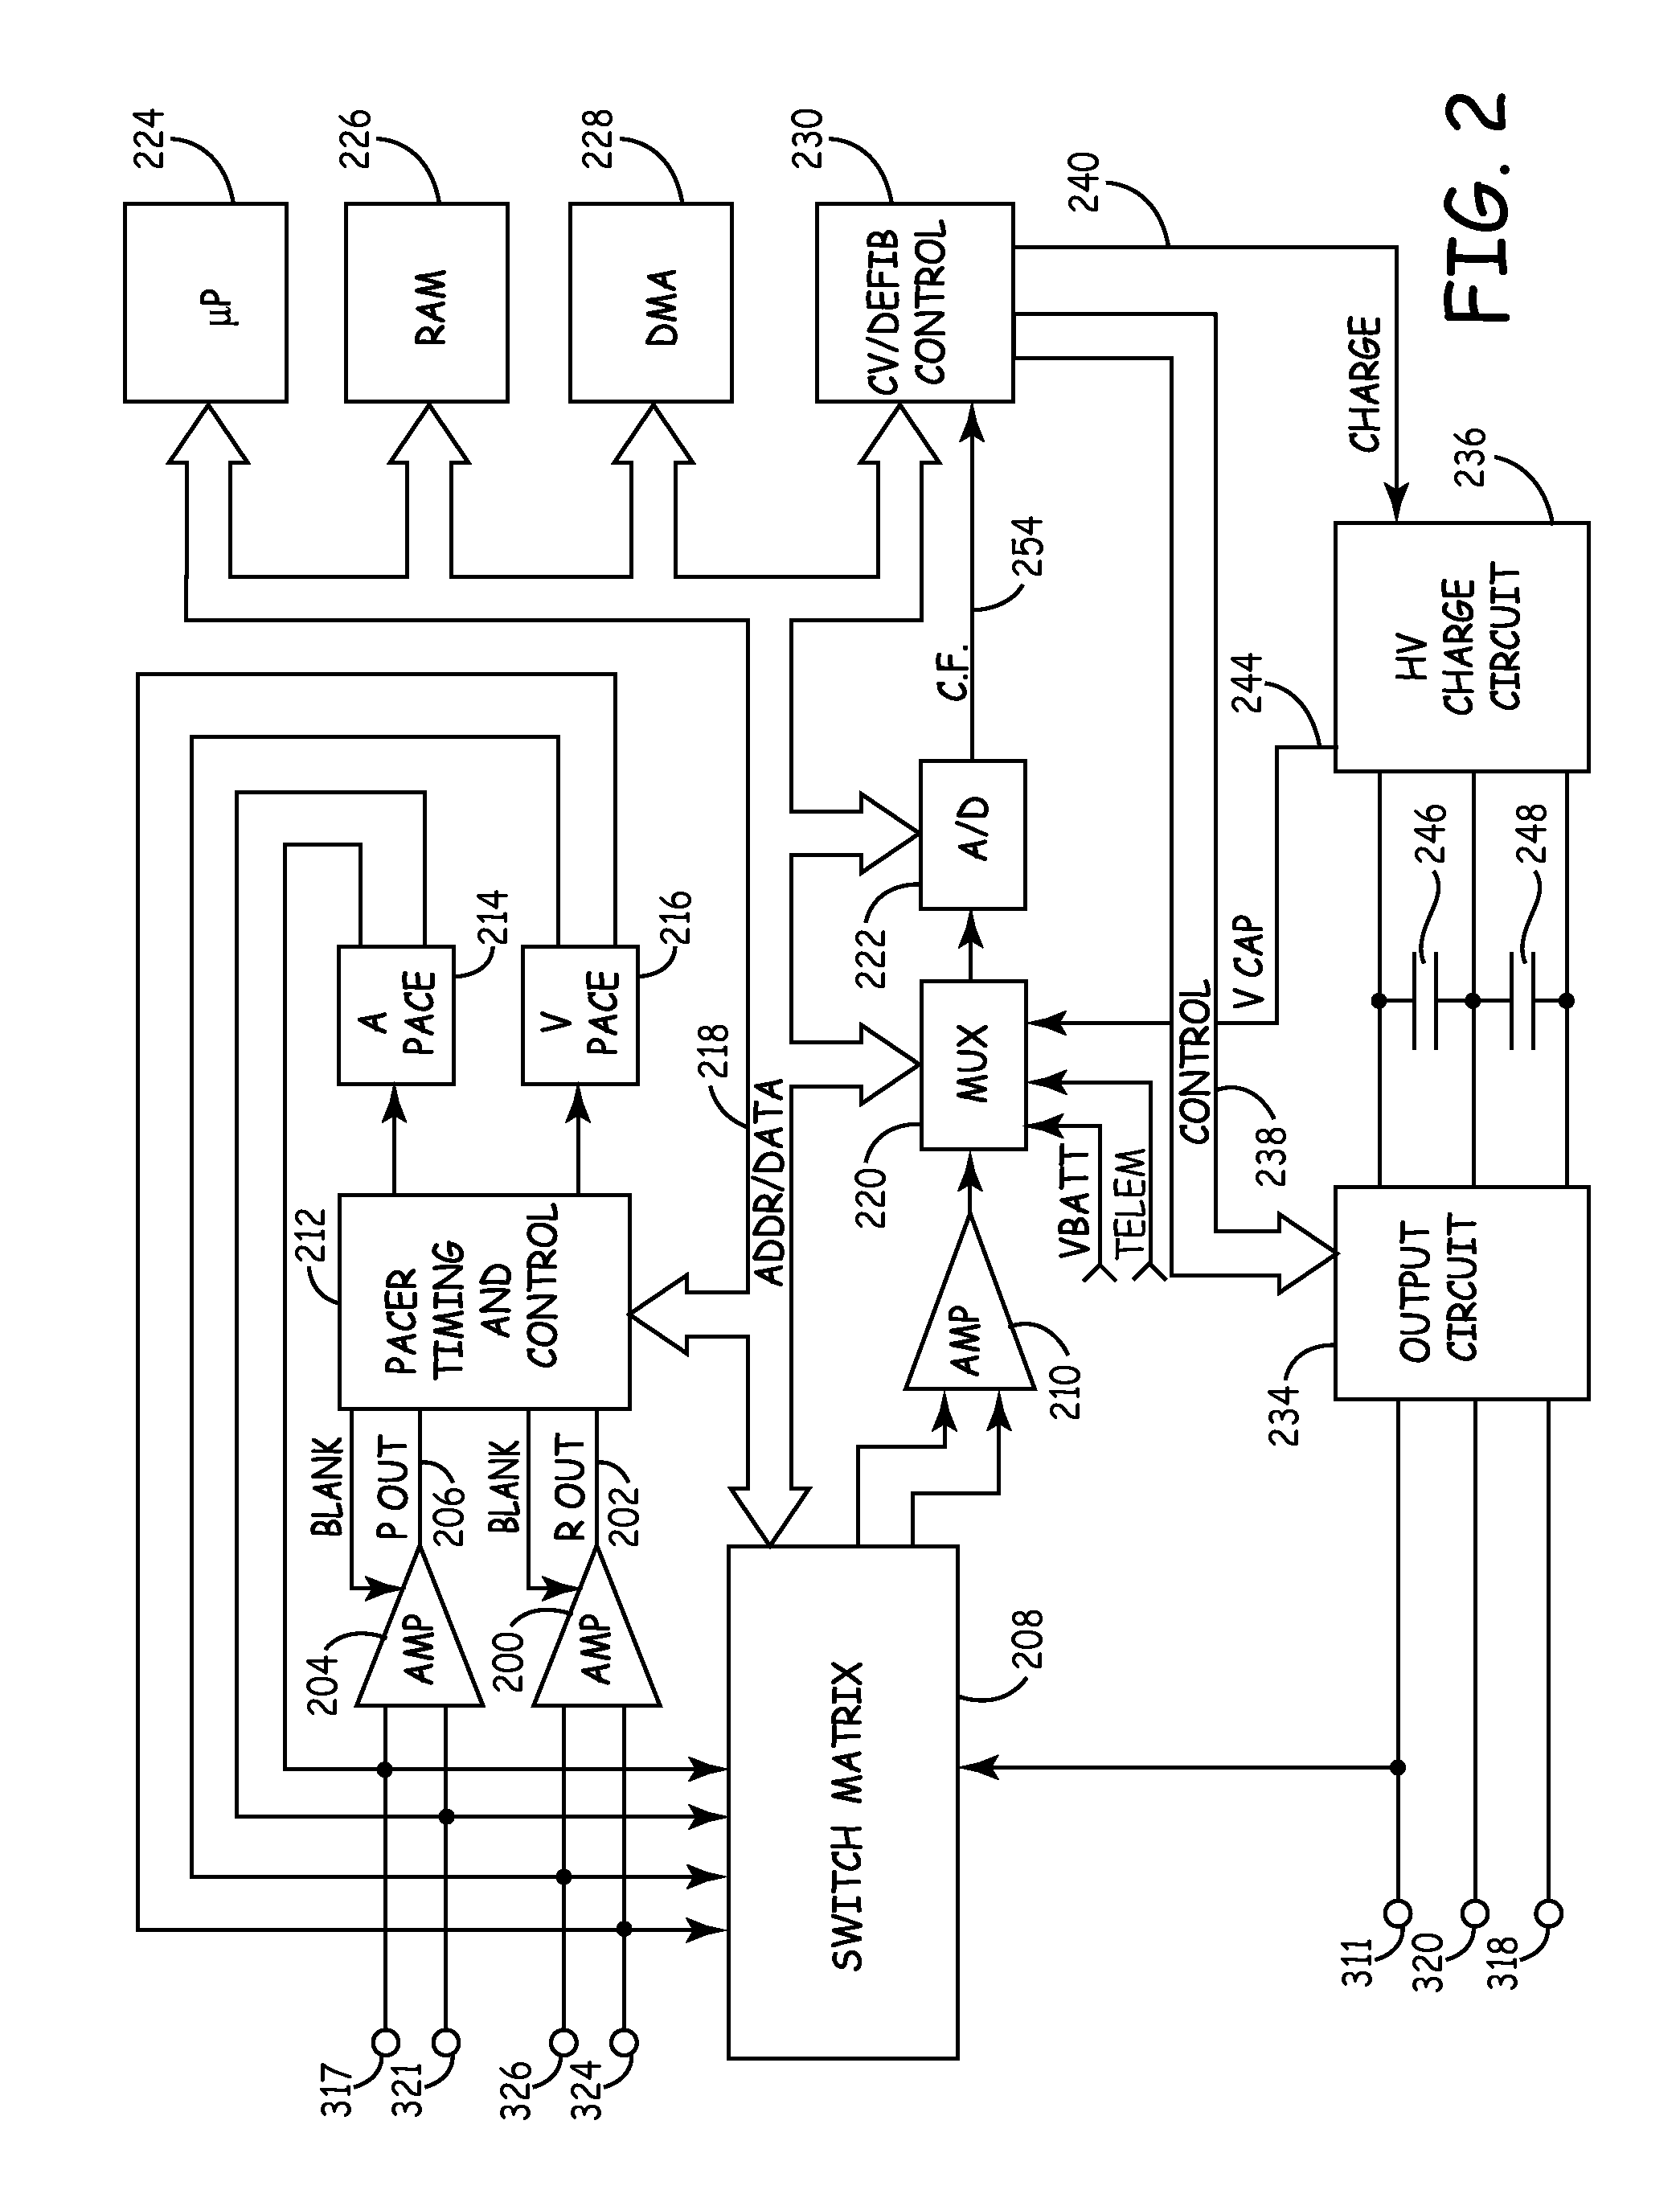 Implantable medical device and method for delivering therapy for sleep-disordered breathing